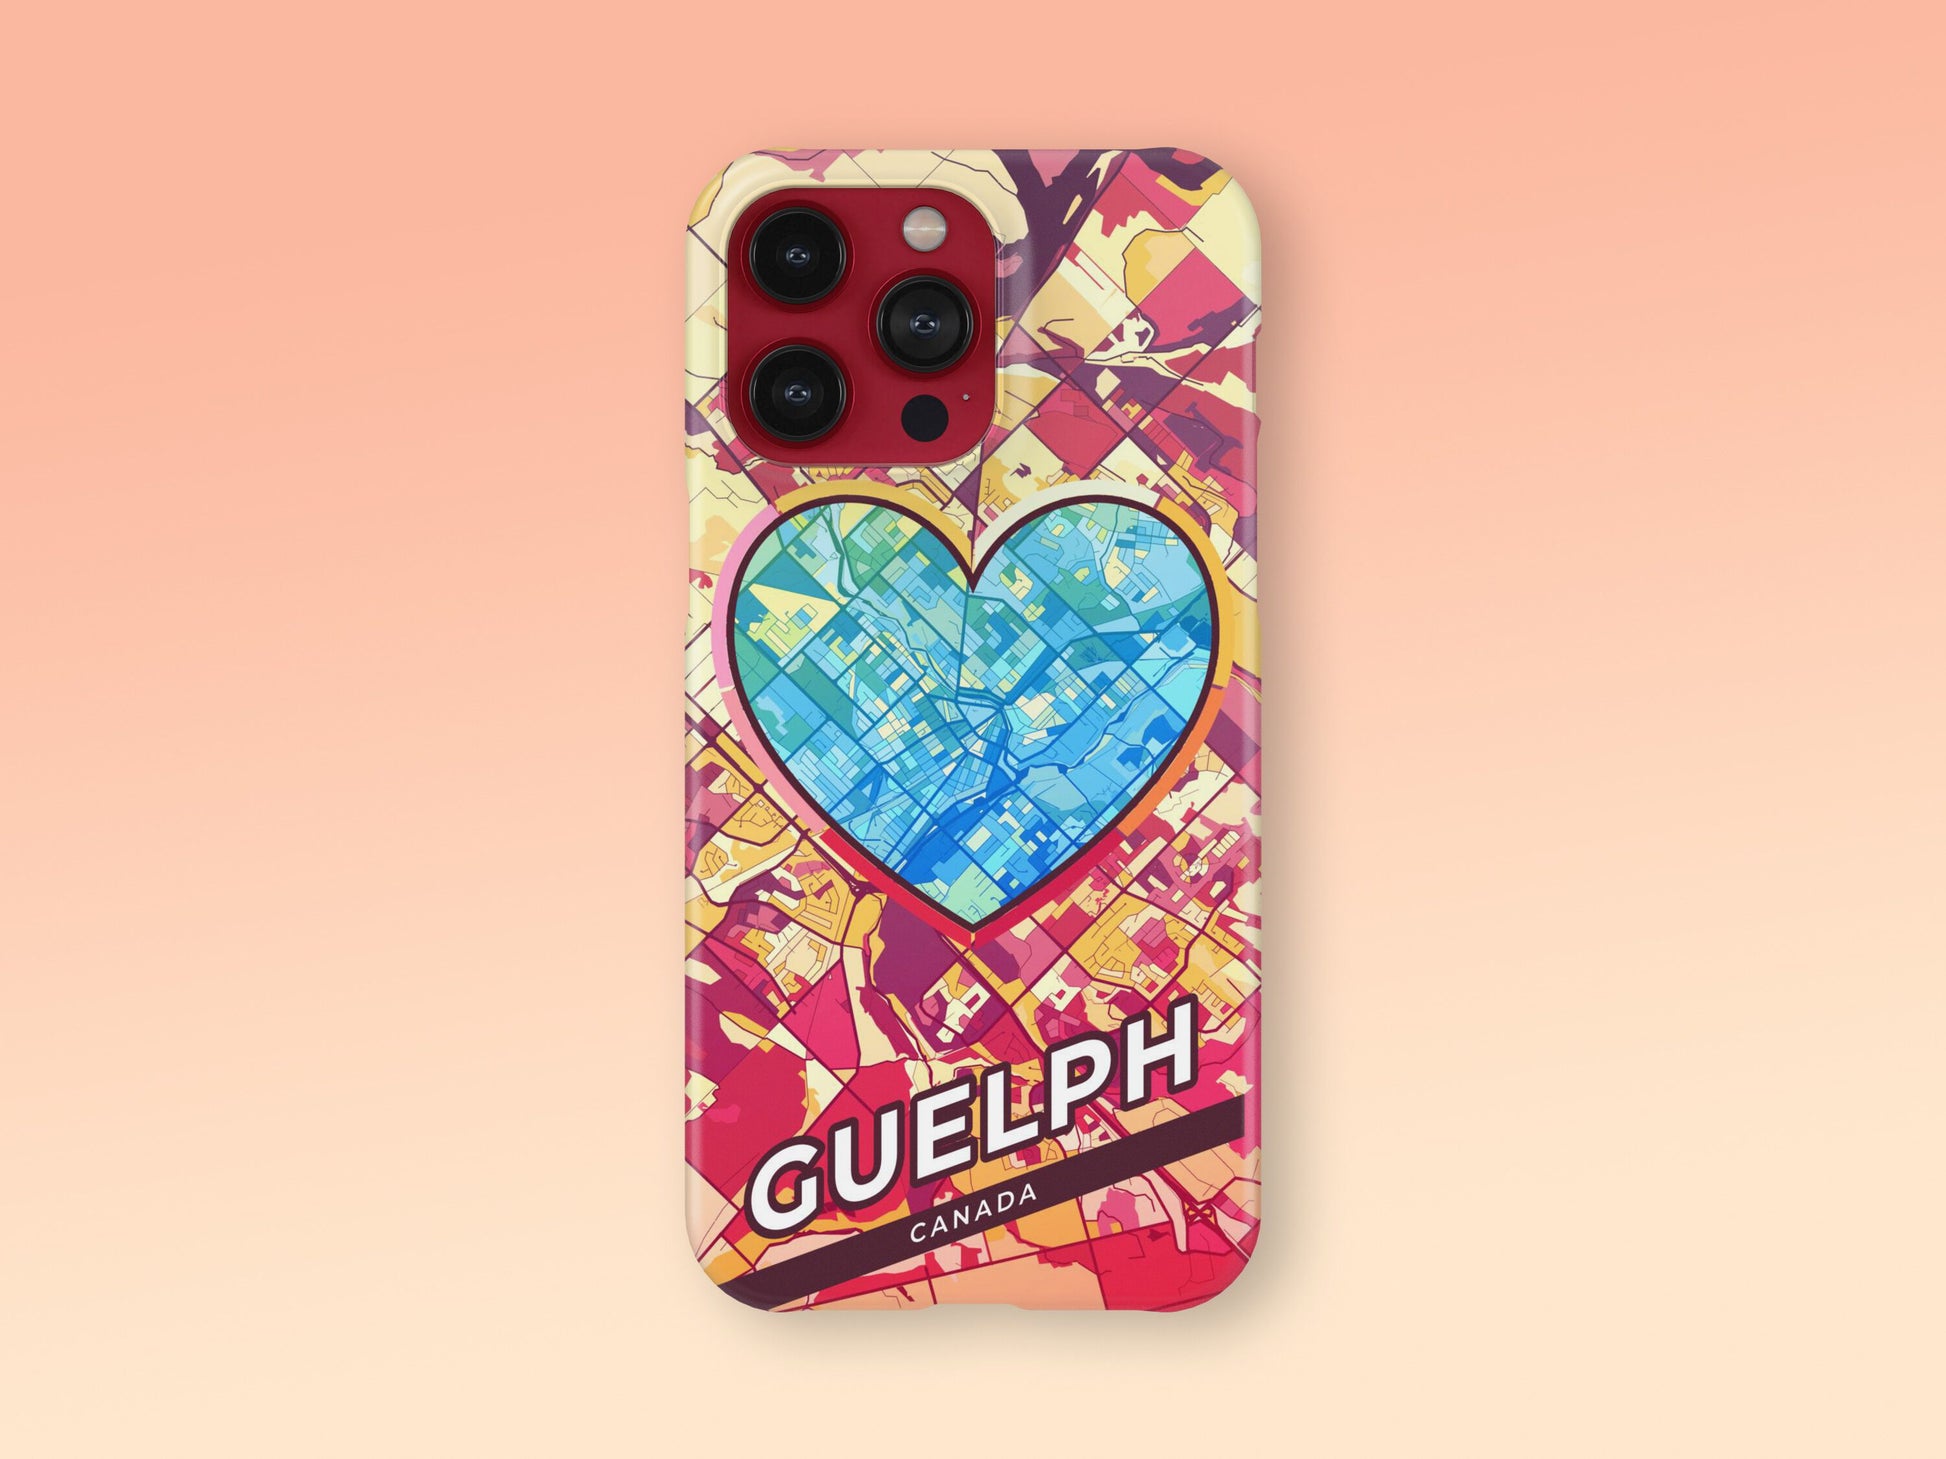 Guelph Canada slim phone case with colorful icon. Birthday, wedding or housewarming gift. Couple match cases. 2